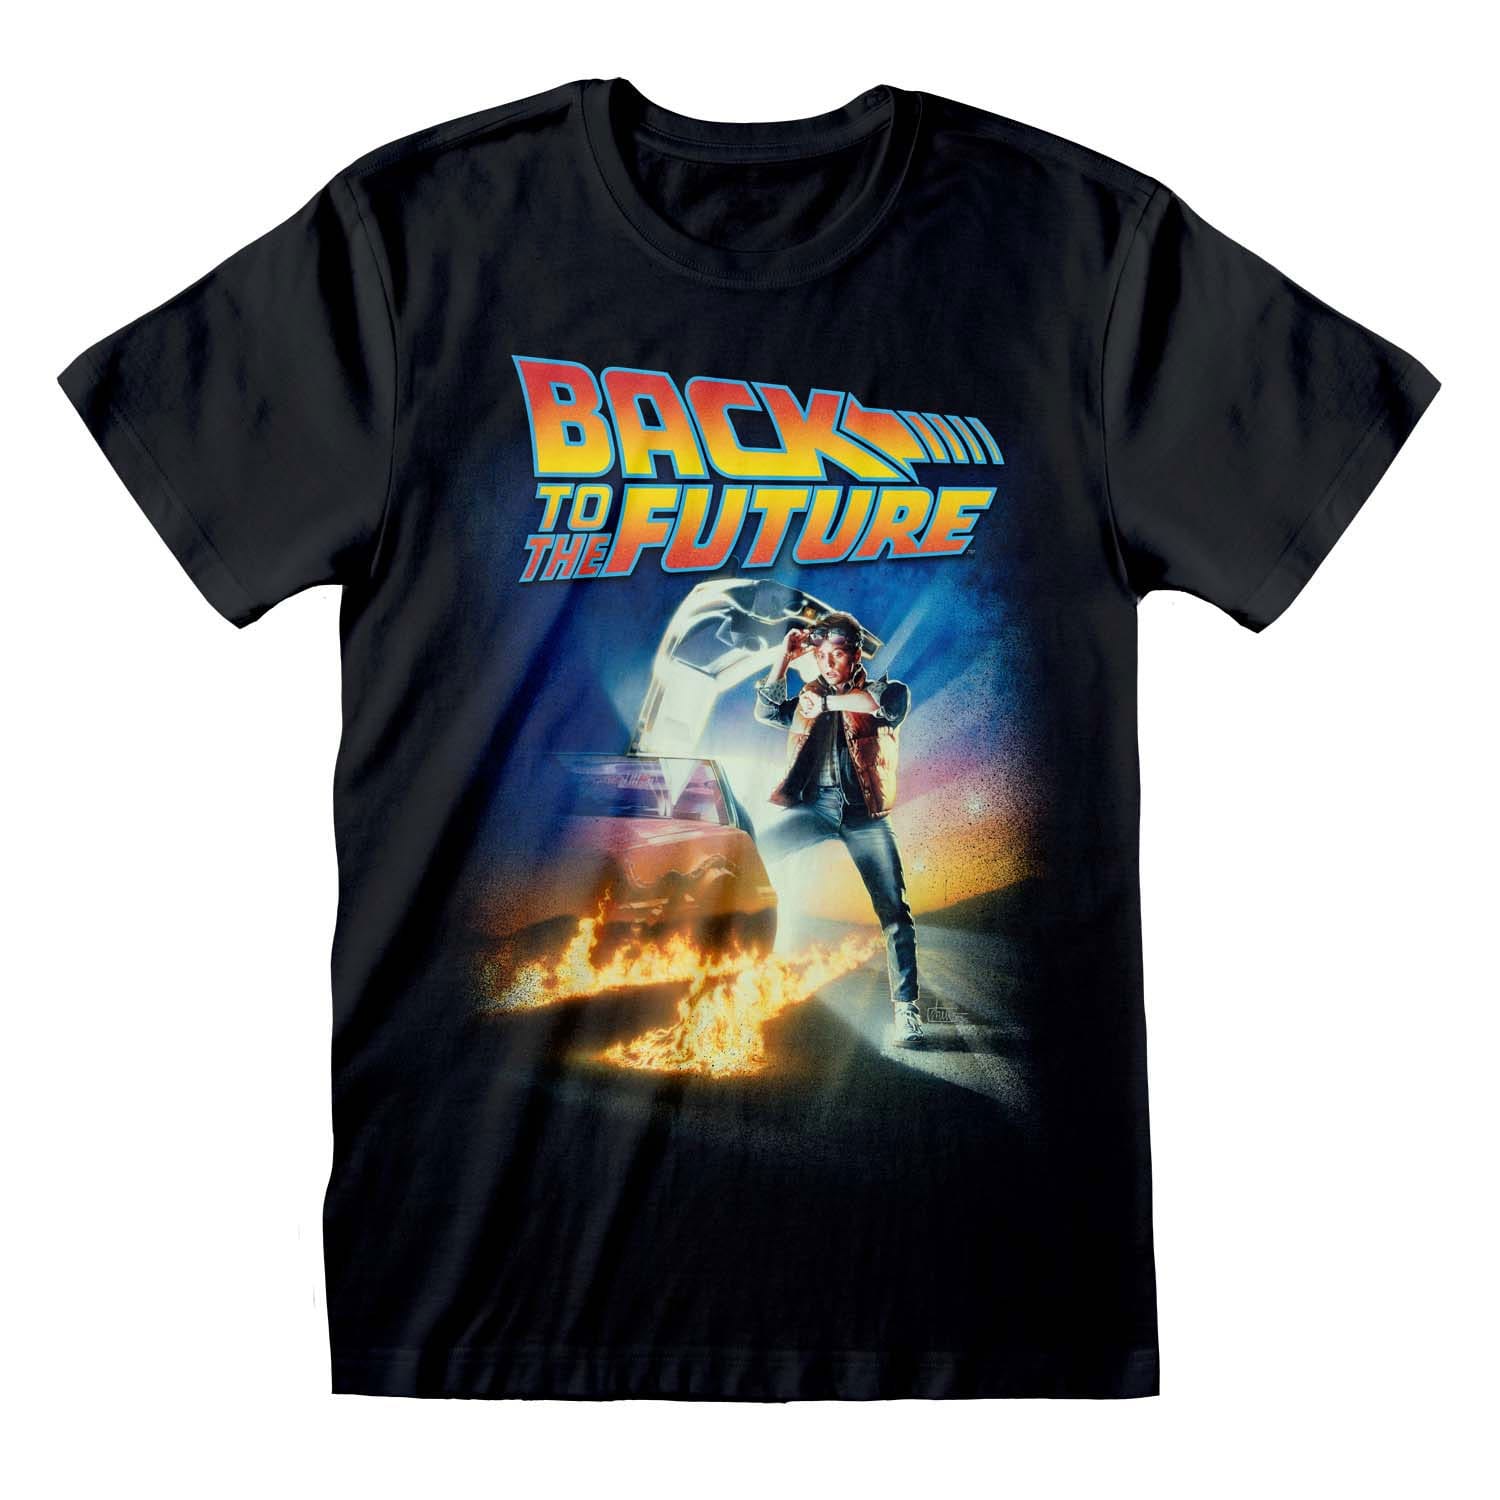 Back to the Future T-Shirt Poster Size L